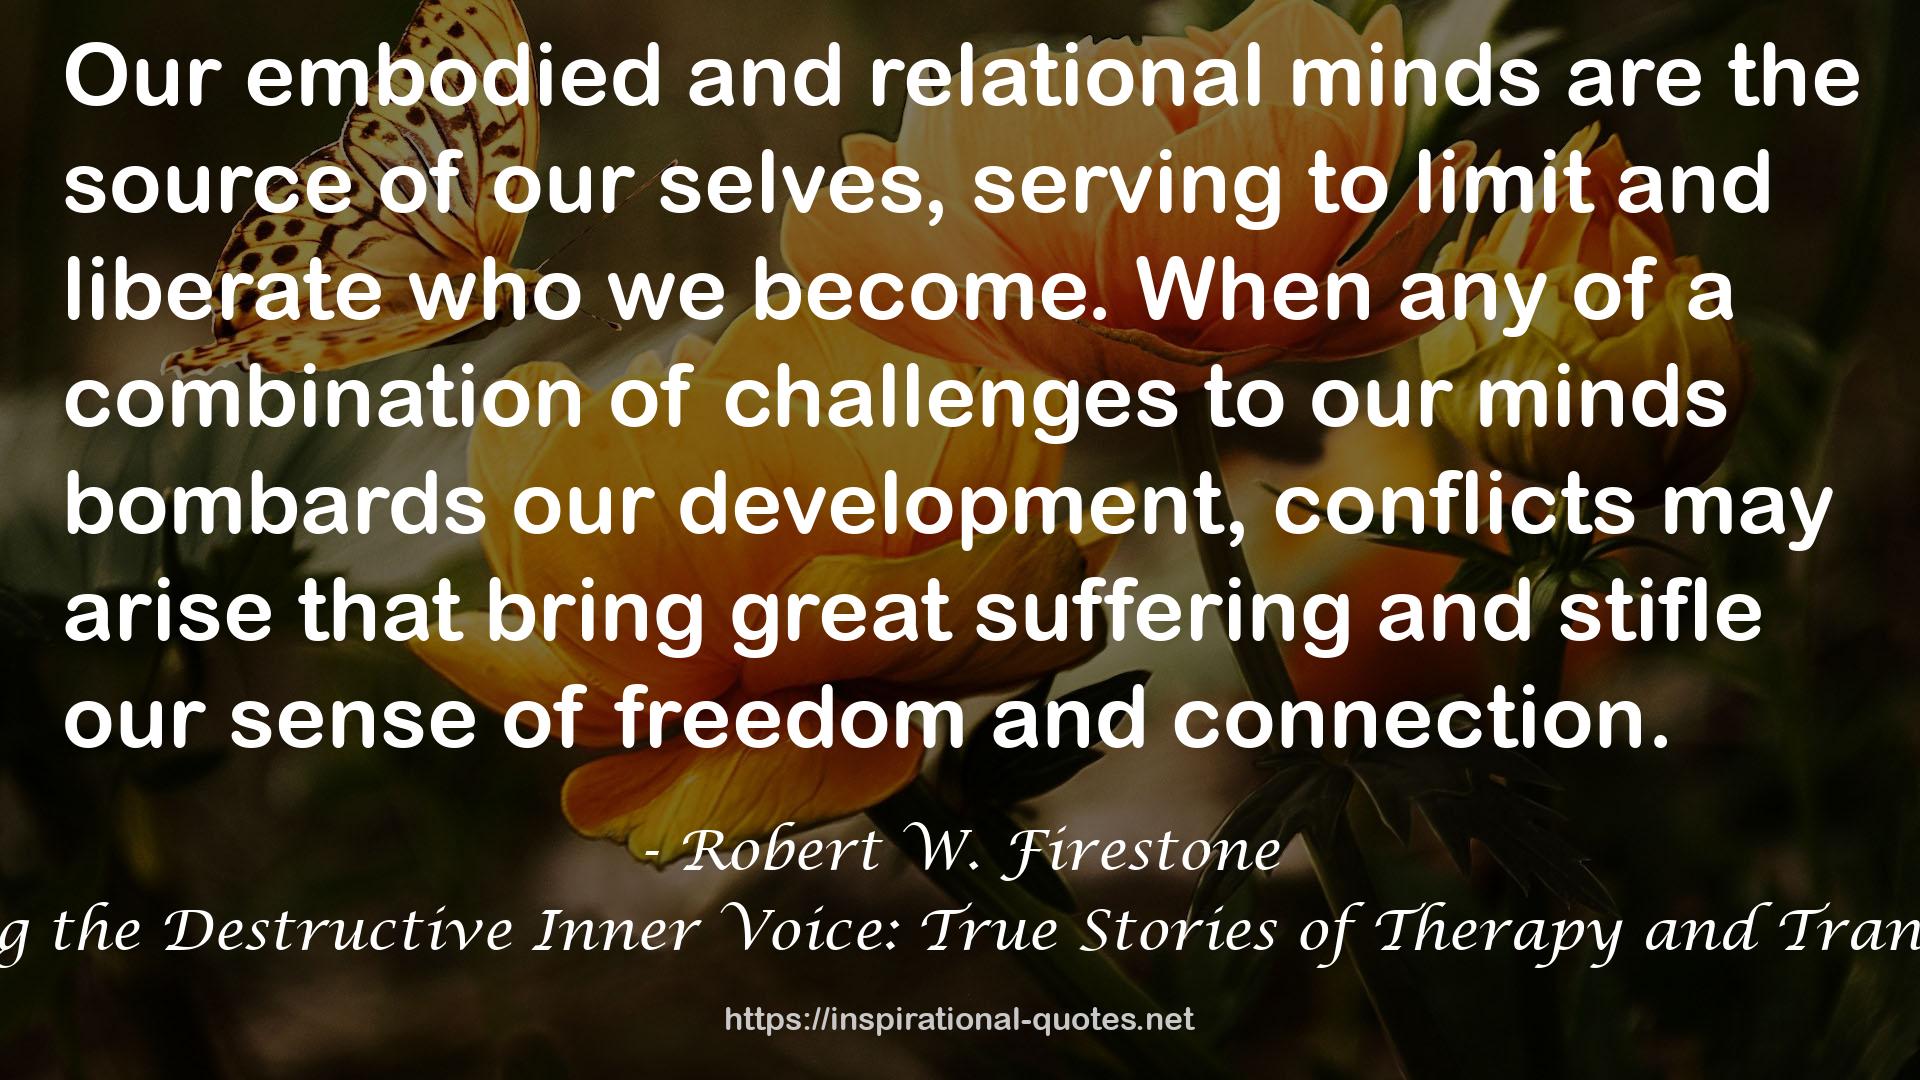 Overcoming the Destructive Inner Voice: True Stories of Therapy and Transformation QUOTES